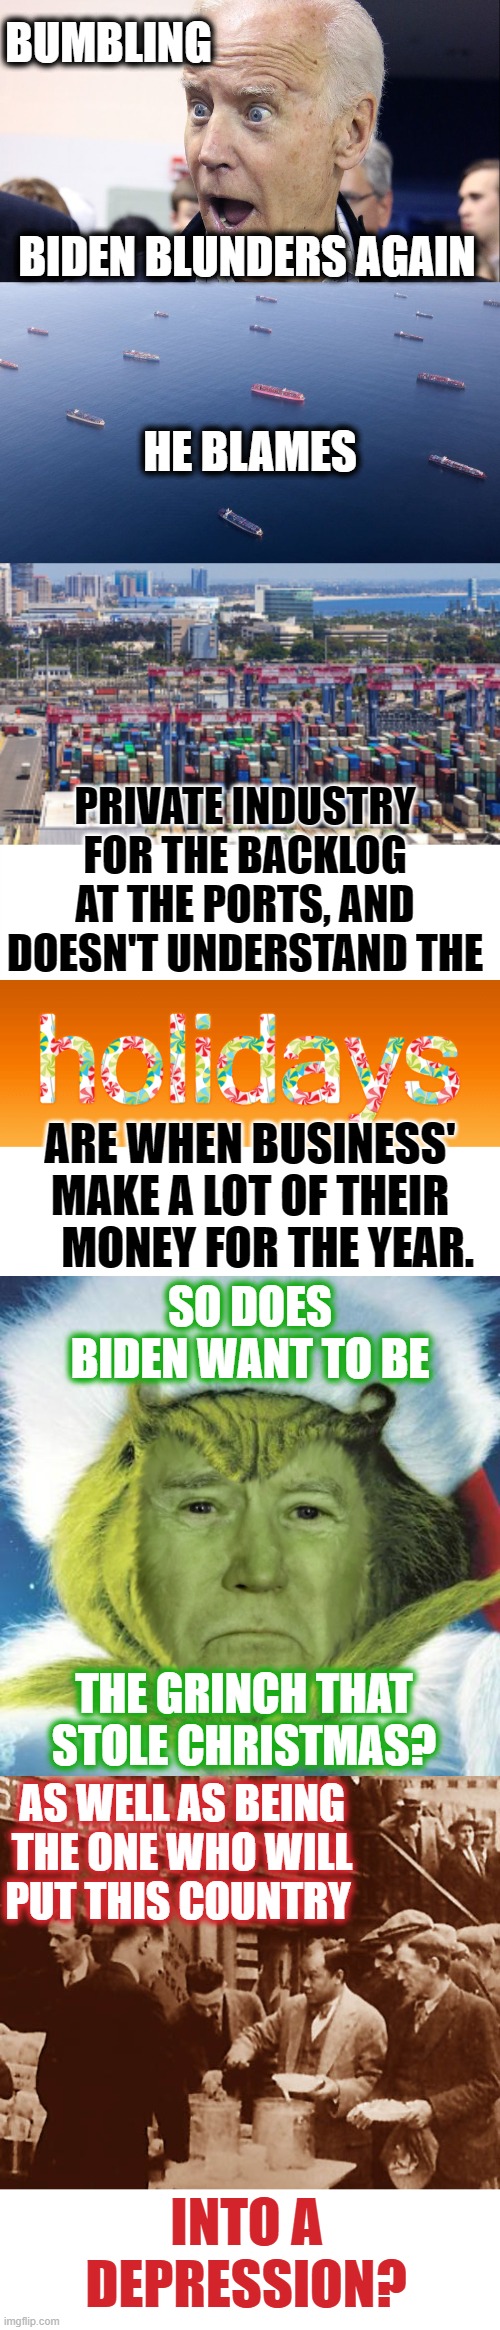 I'm Sorry But I Just Have To Ask... | BUMBLING; BIDEN BLUNDERS AGAIN; HE BLAMES; PRIVATE INDUSTRY FOR THE BACKLOG AT THE PORTS, AND DOESN'T UNDERSTAND THE; ARE WHEN BUSINESS' MAKE A LOT OF THEIR     MONEY FOR THE YEAR. SO DOES BIDEN WANT TO BE; THE GRINCH THAT STOLE CHRISTMAS? AS WELL AS BEING THE ONE WHO WILL PUT THIS COUNTRY; INTO A DEPRESSION? | image tagged in memes,conservatives,politics,joe biden,you're doing it wrong,failure | made w/ Imgflip meme maker